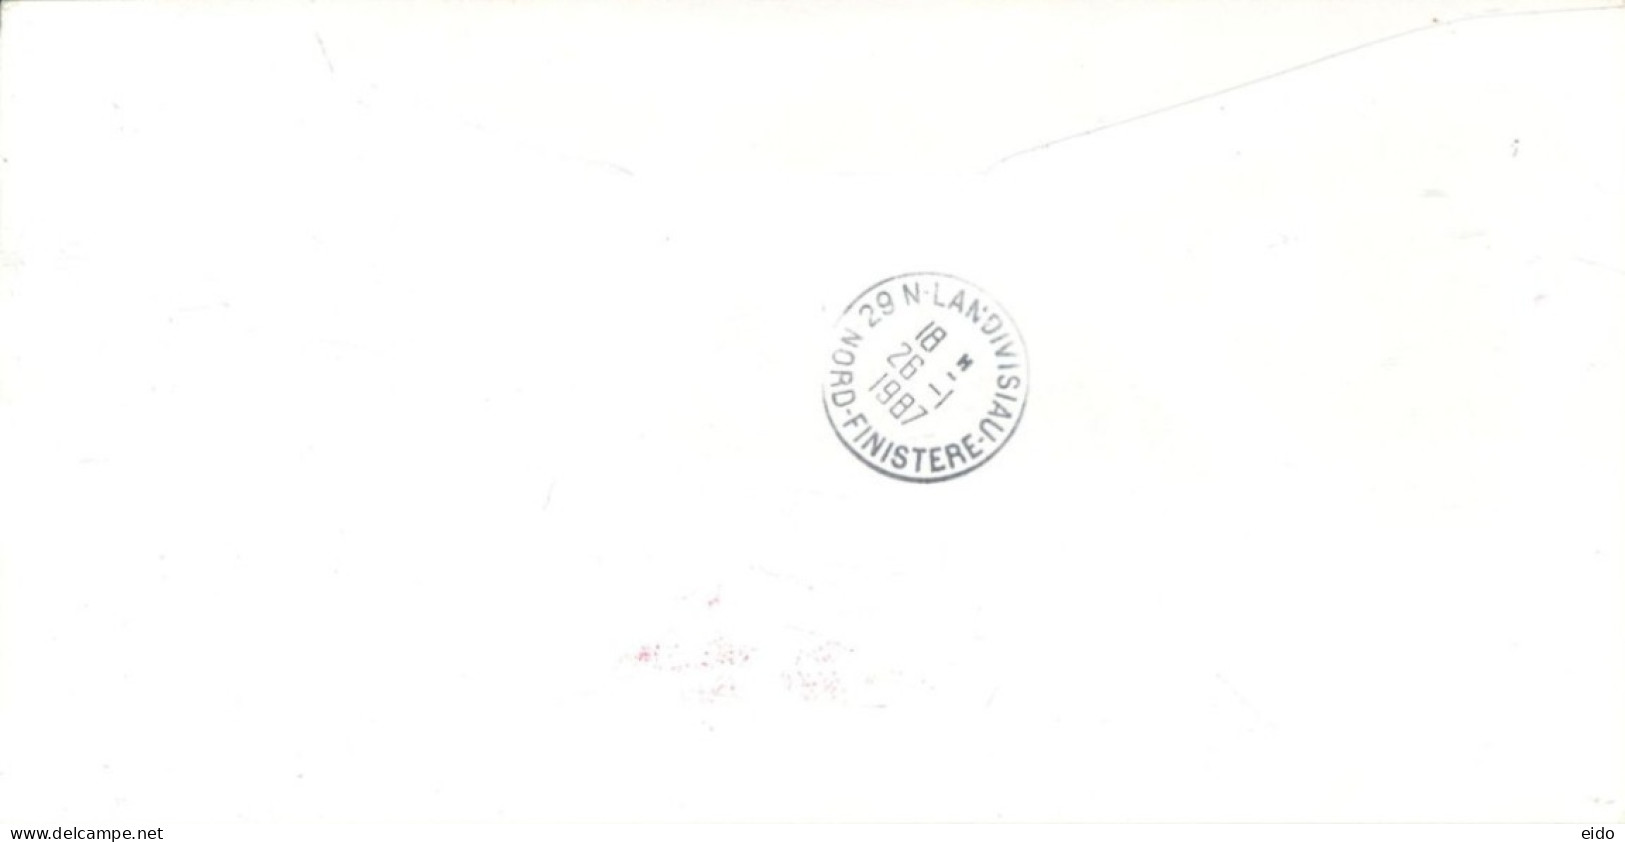 AUSTRALIAN ANTARCTIC TERRITORY - 1986, SPECIAL STAMP COVER SIGNED BY ADELICOP XXIV SENT TO FRANCE. - Lettres & Documents